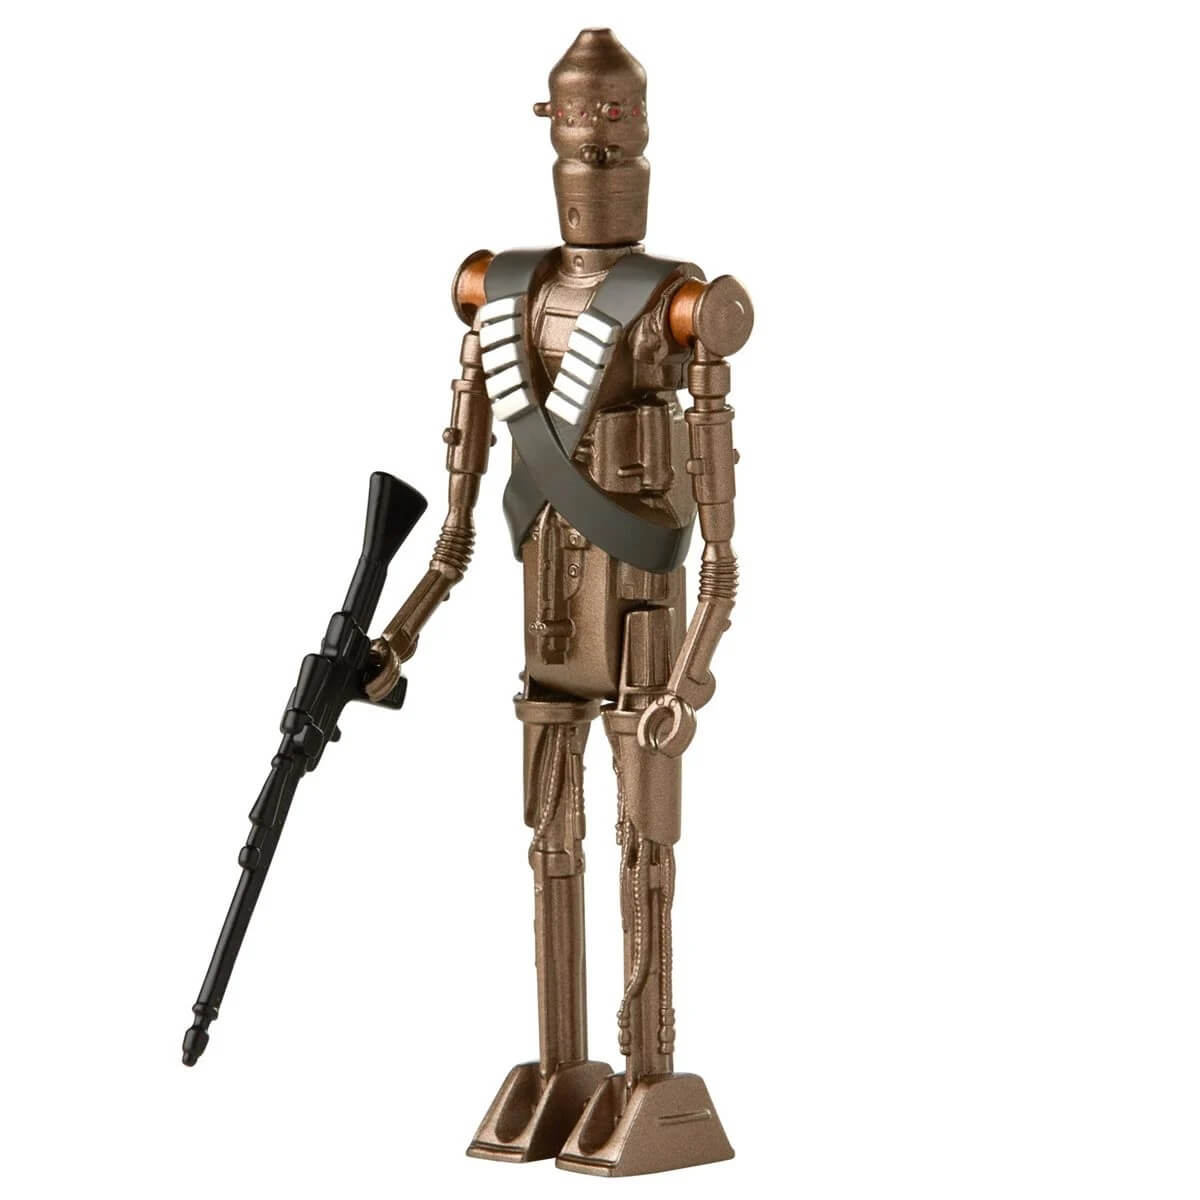 Star Wars Retro Collection IG-11 3.75" Action Figure